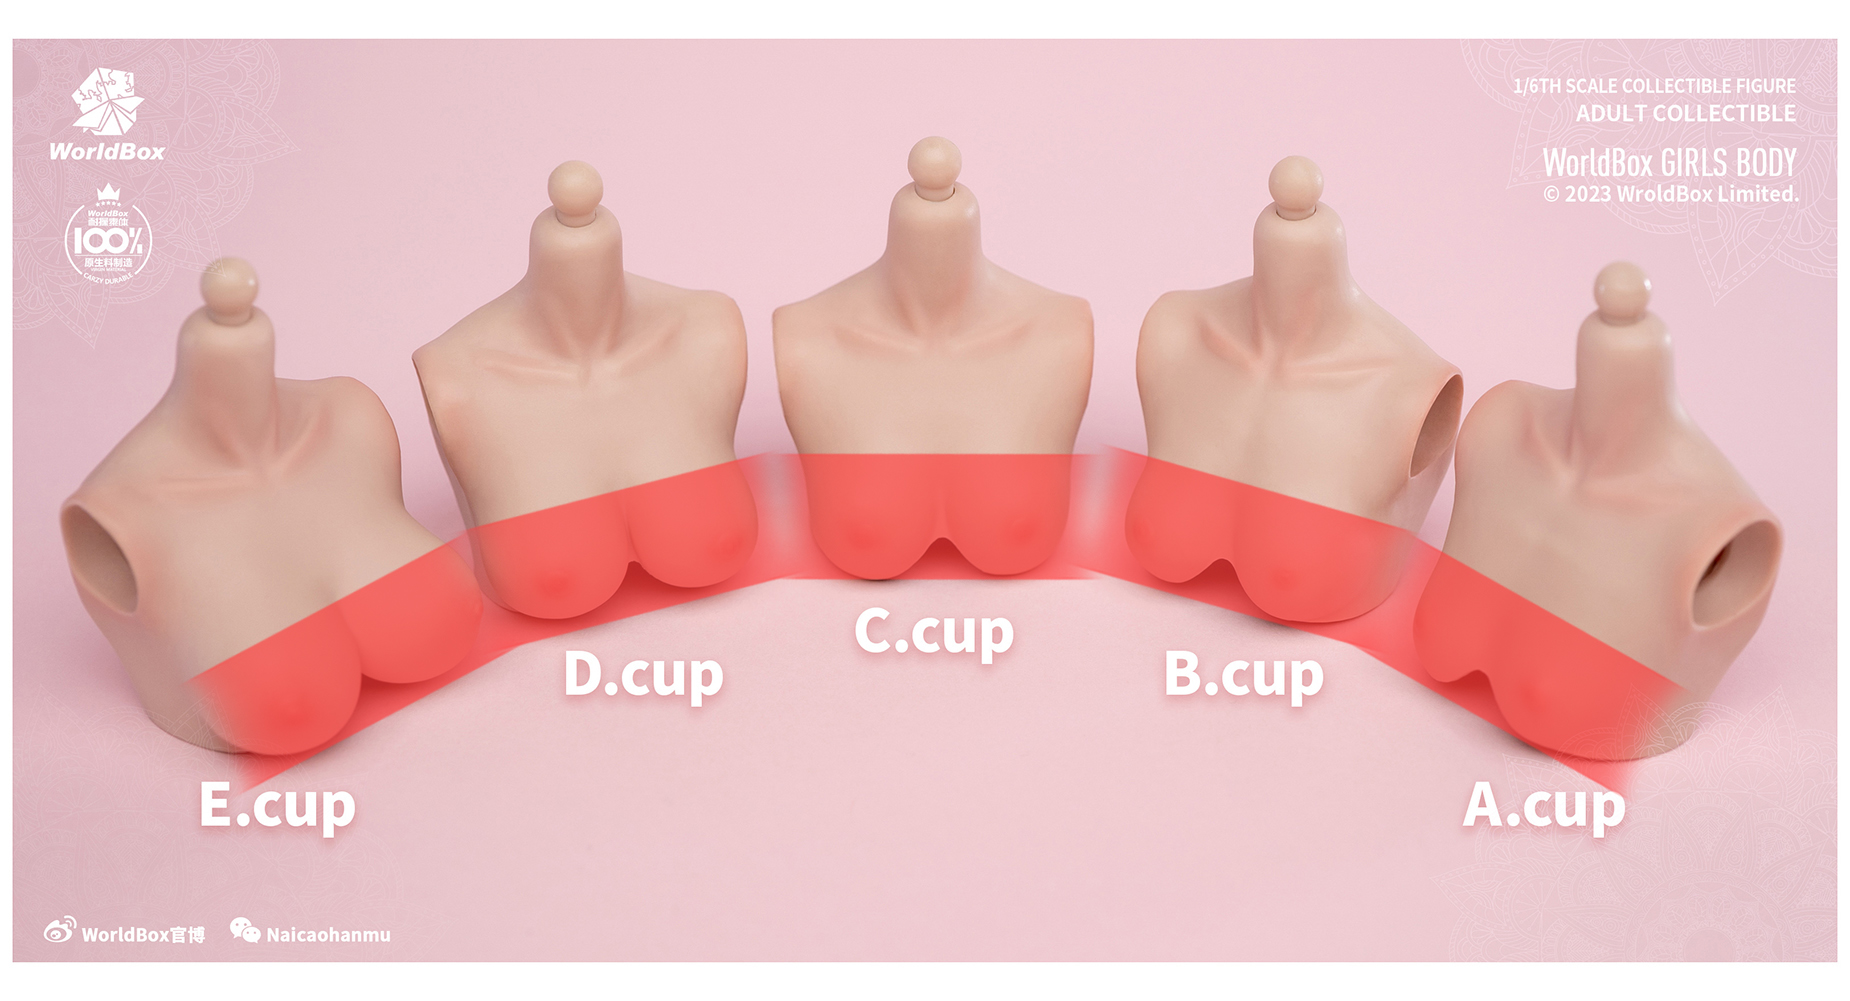 1/6 Rubber Chest D Cup Pale for Worldbox Girl Bodies [WB-CUPDP]